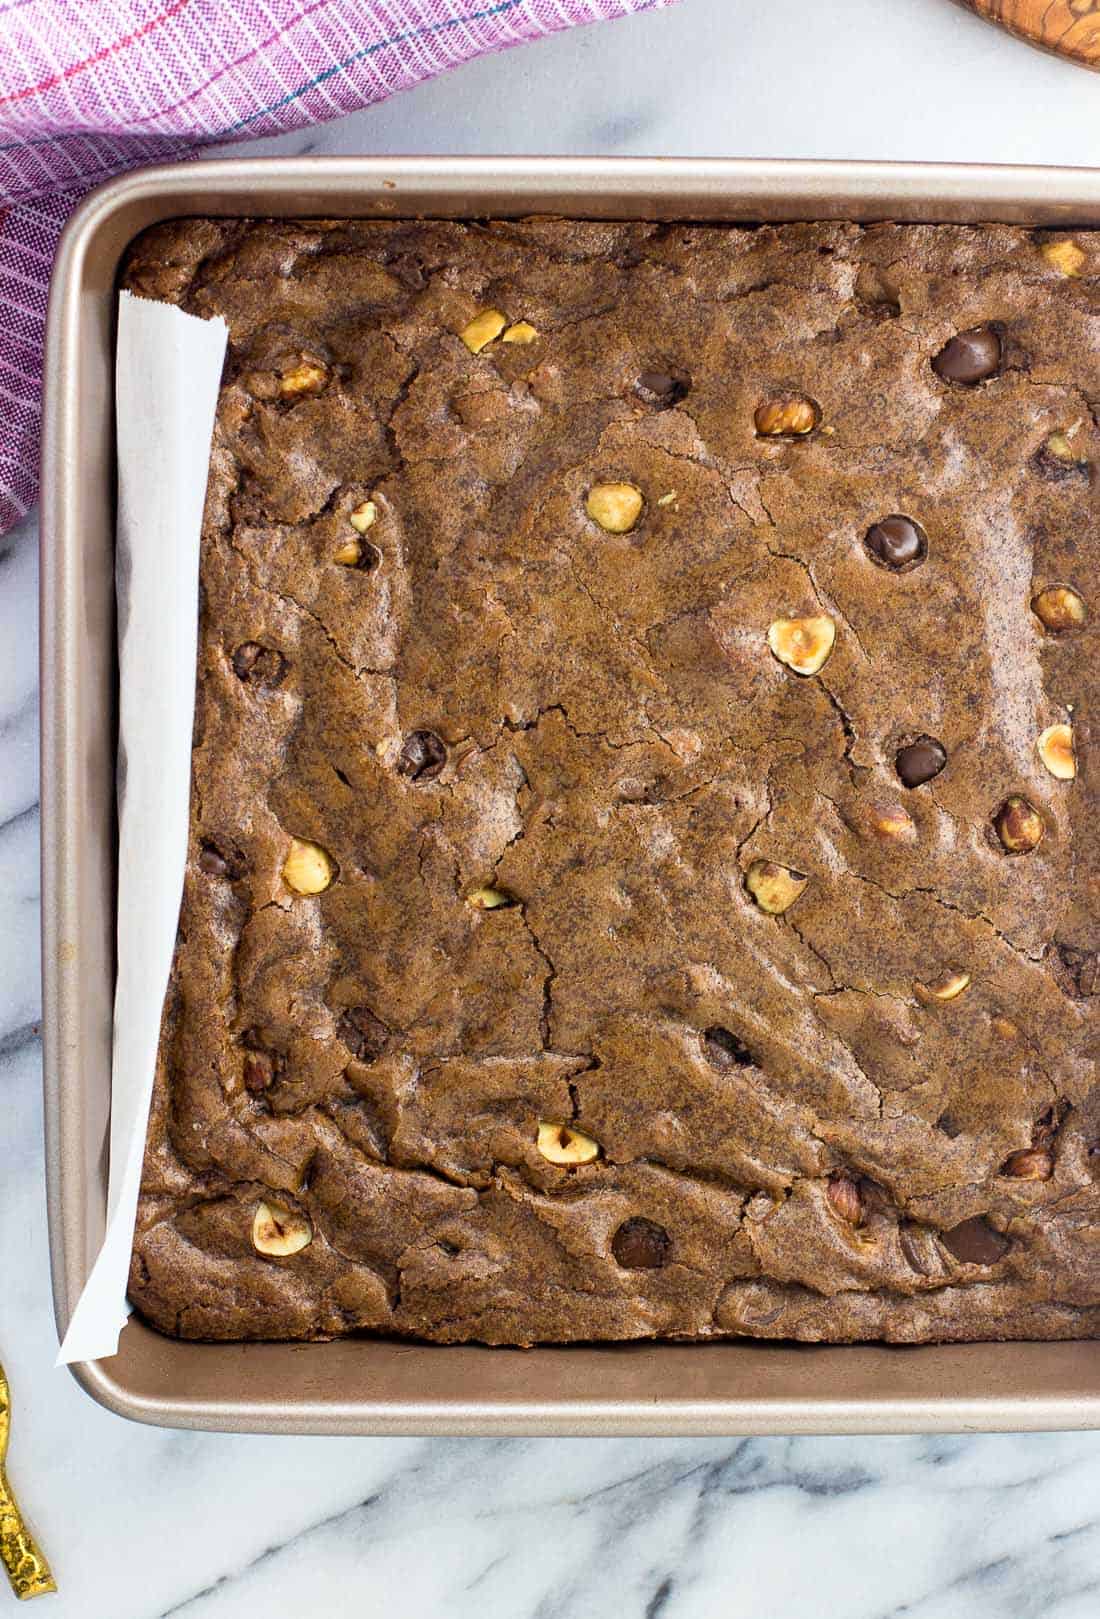 Hazelnut brownies baked in a pan before being sliced